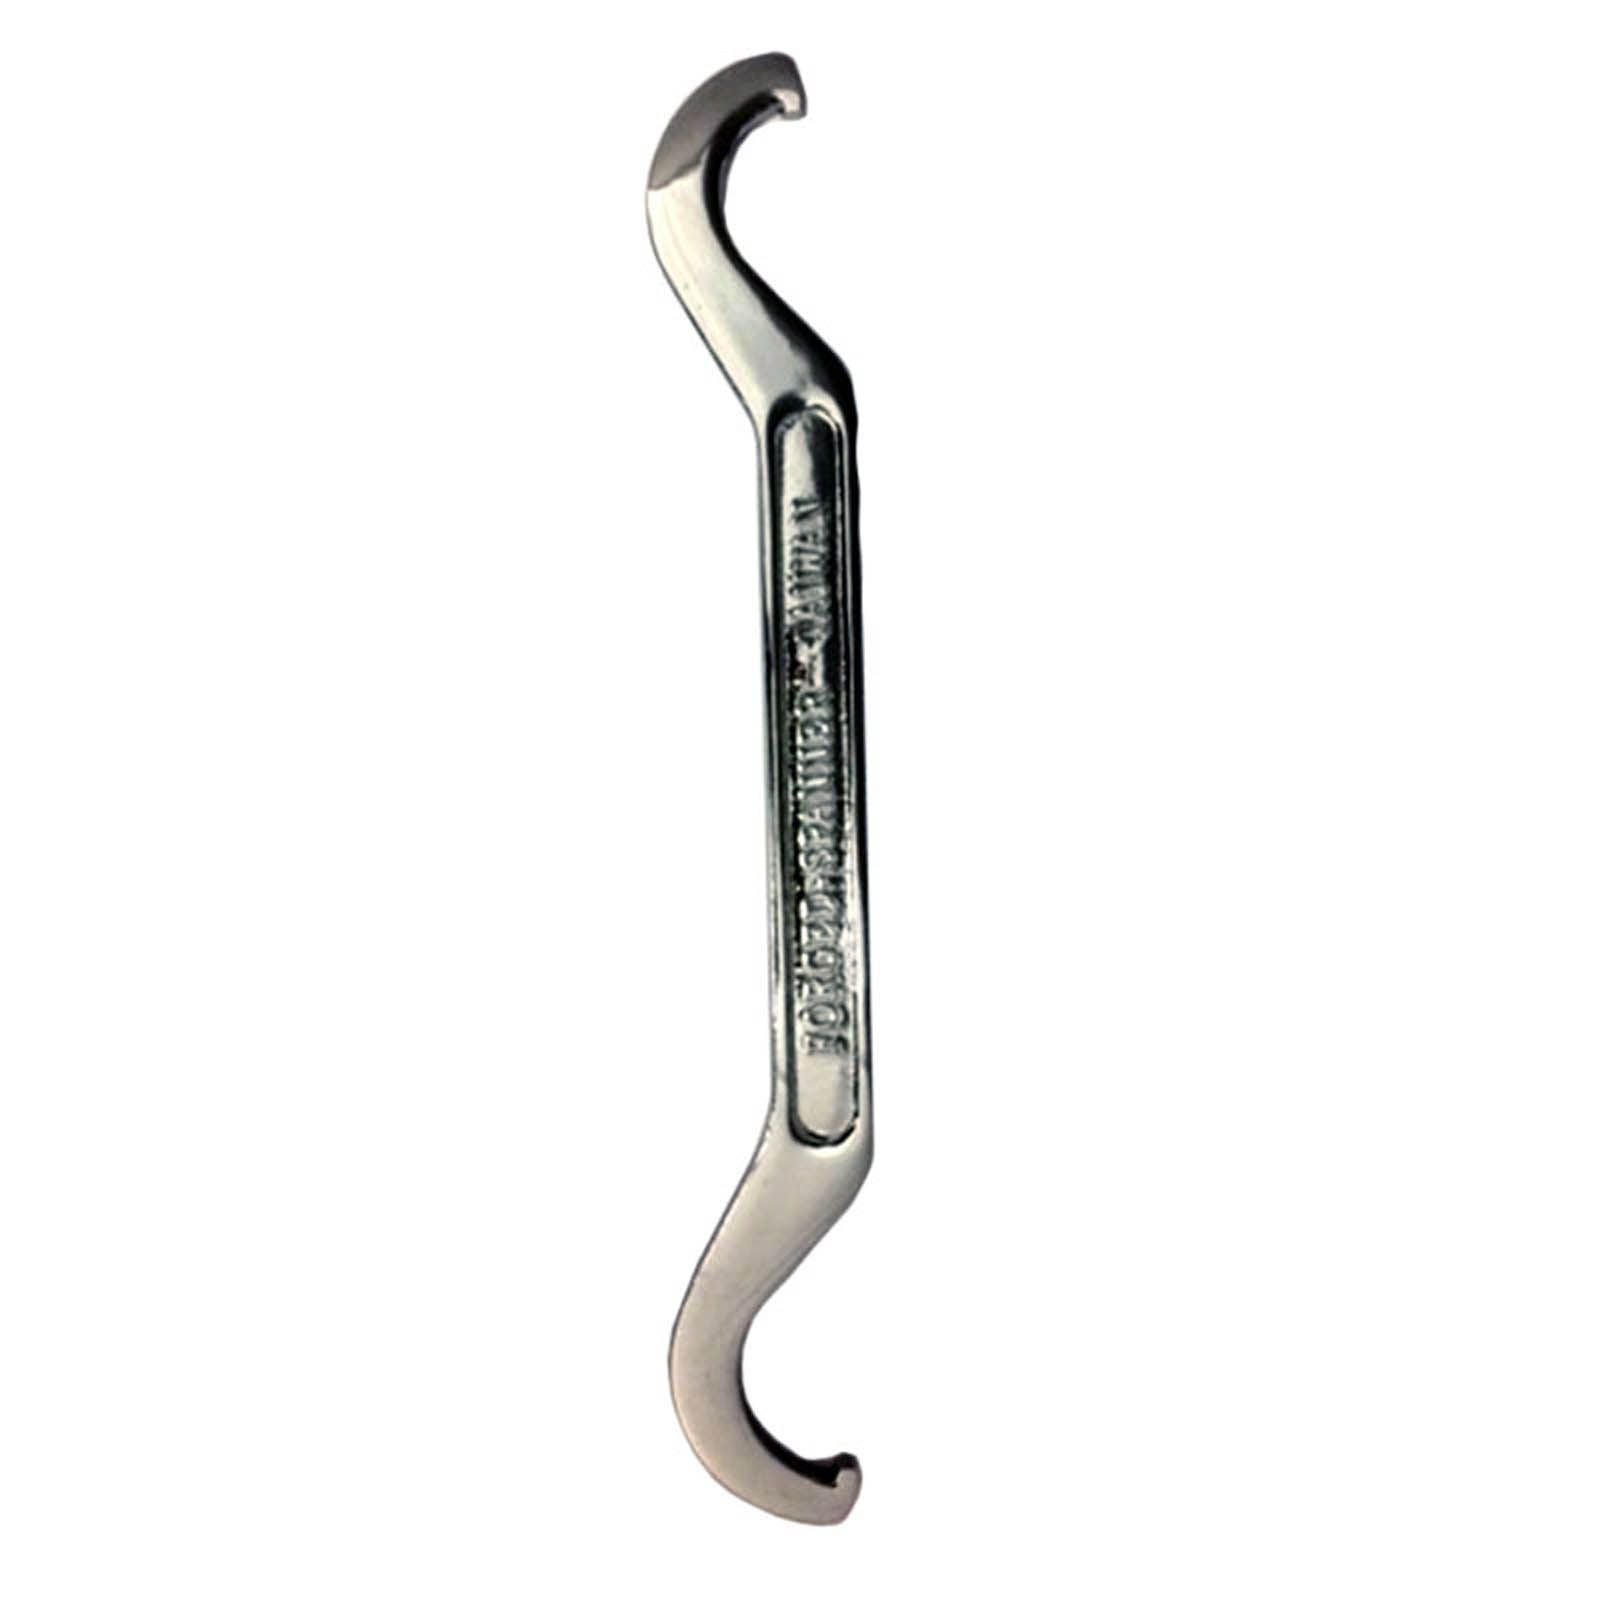 New WHITES Heavy Duty Shock Spanner Wrench #TMD8466310